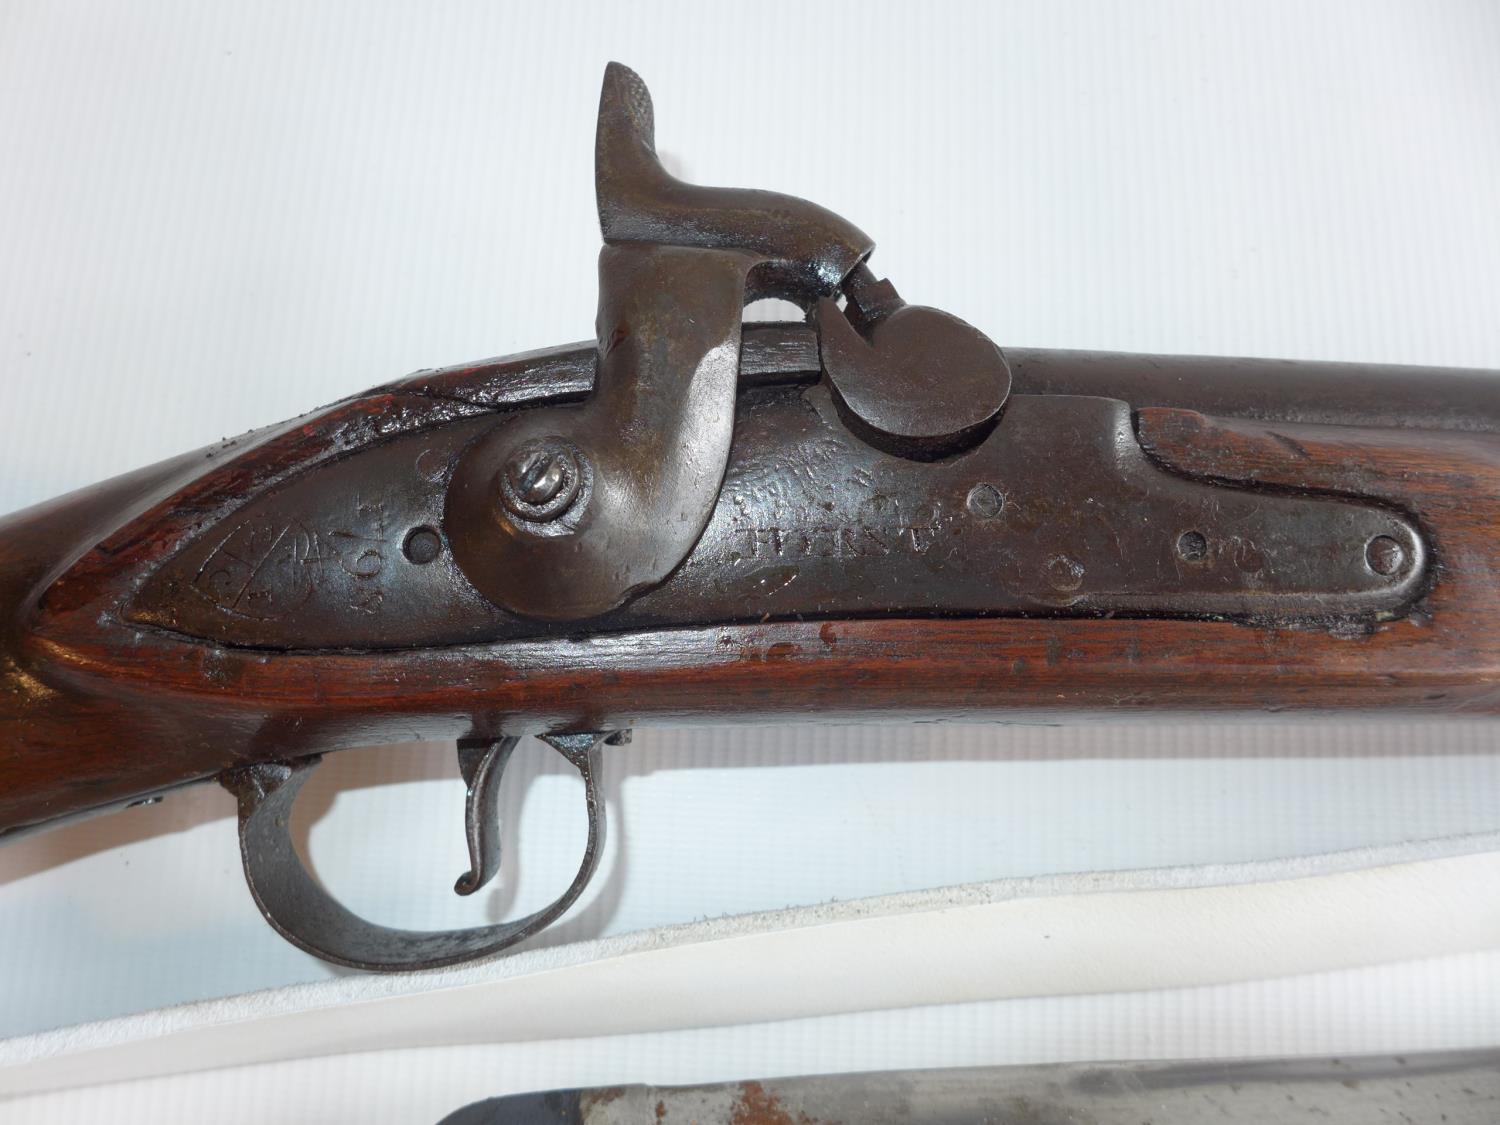 AN EAST INDIA COMPANY PERCUSSION CAP BROWN BESS MUSKET AND BAYONET, LOCK MARKED HURST, LENGTH OF - Image 2 of 11